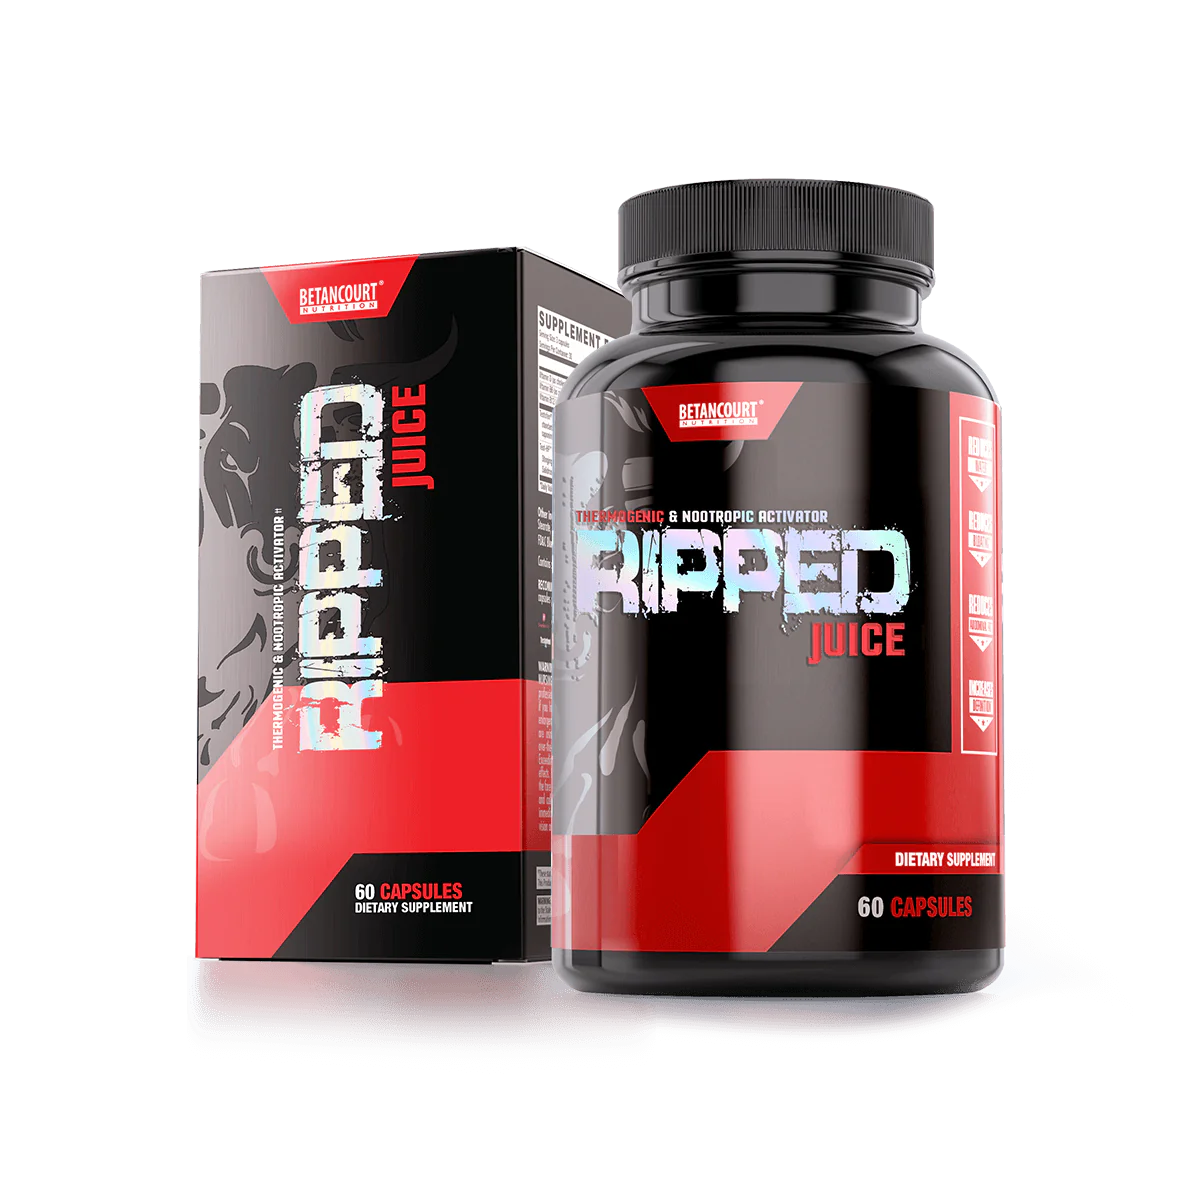 RIPPED JUICE THERMOGENIC & NOOTROPIC ACTIVATOR 60 Capsules